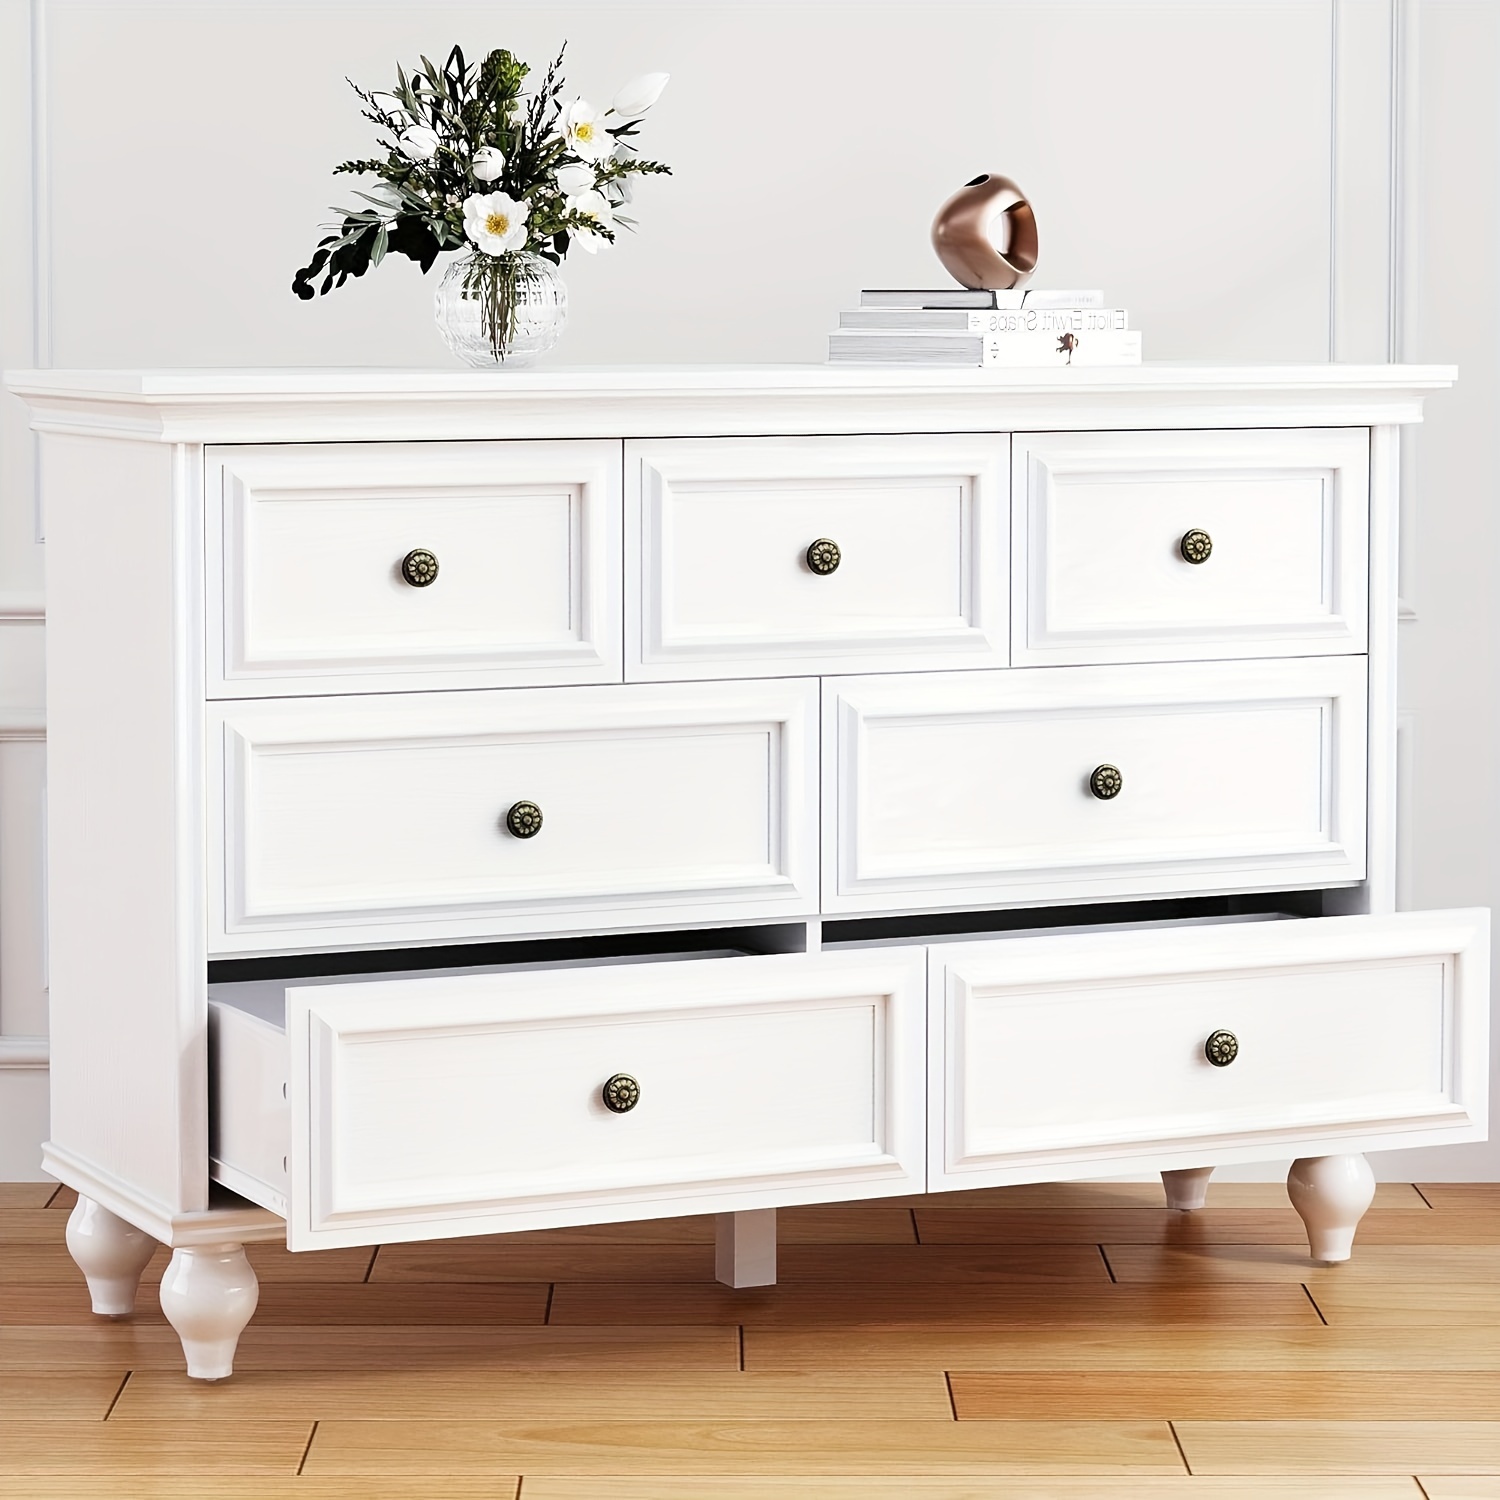 

7 Drawer Dresser For Bedroom, Drawer Of Chest With Metal Handles, Tv Stand, Closet Organizers And Storage Clothes, Vintage Tall Dresser For Bedroom, Living Room, Entryway, And Closet, White